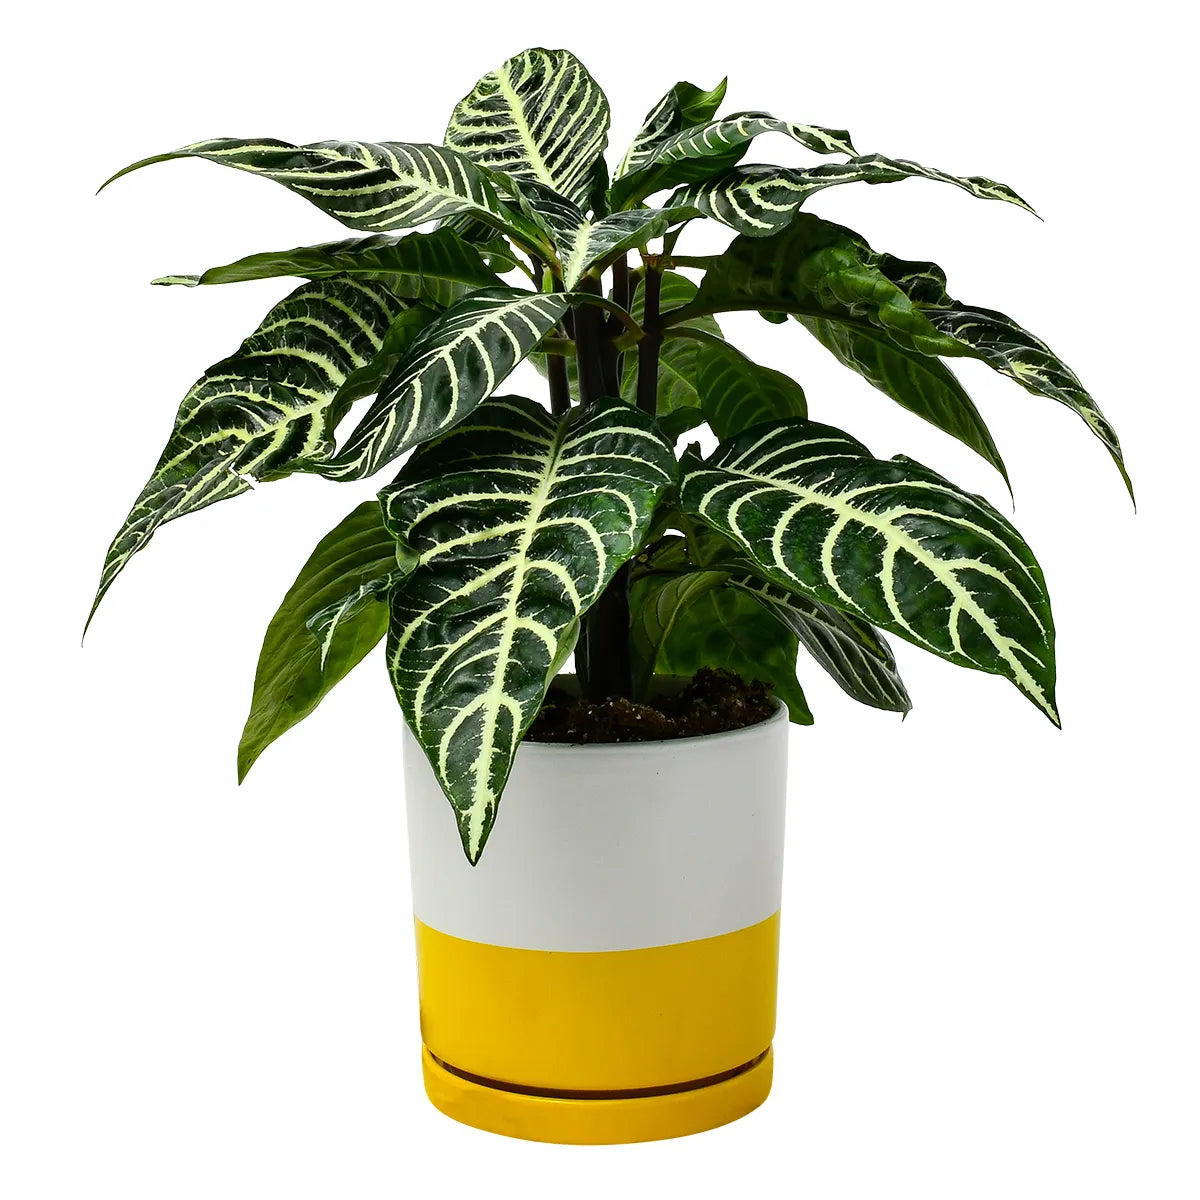 Vibrant Aphelandra squarrosa, or Zebra Plant, with dark green leaves featuring distinctive white veins, nestled in a white pot with yellow accents.